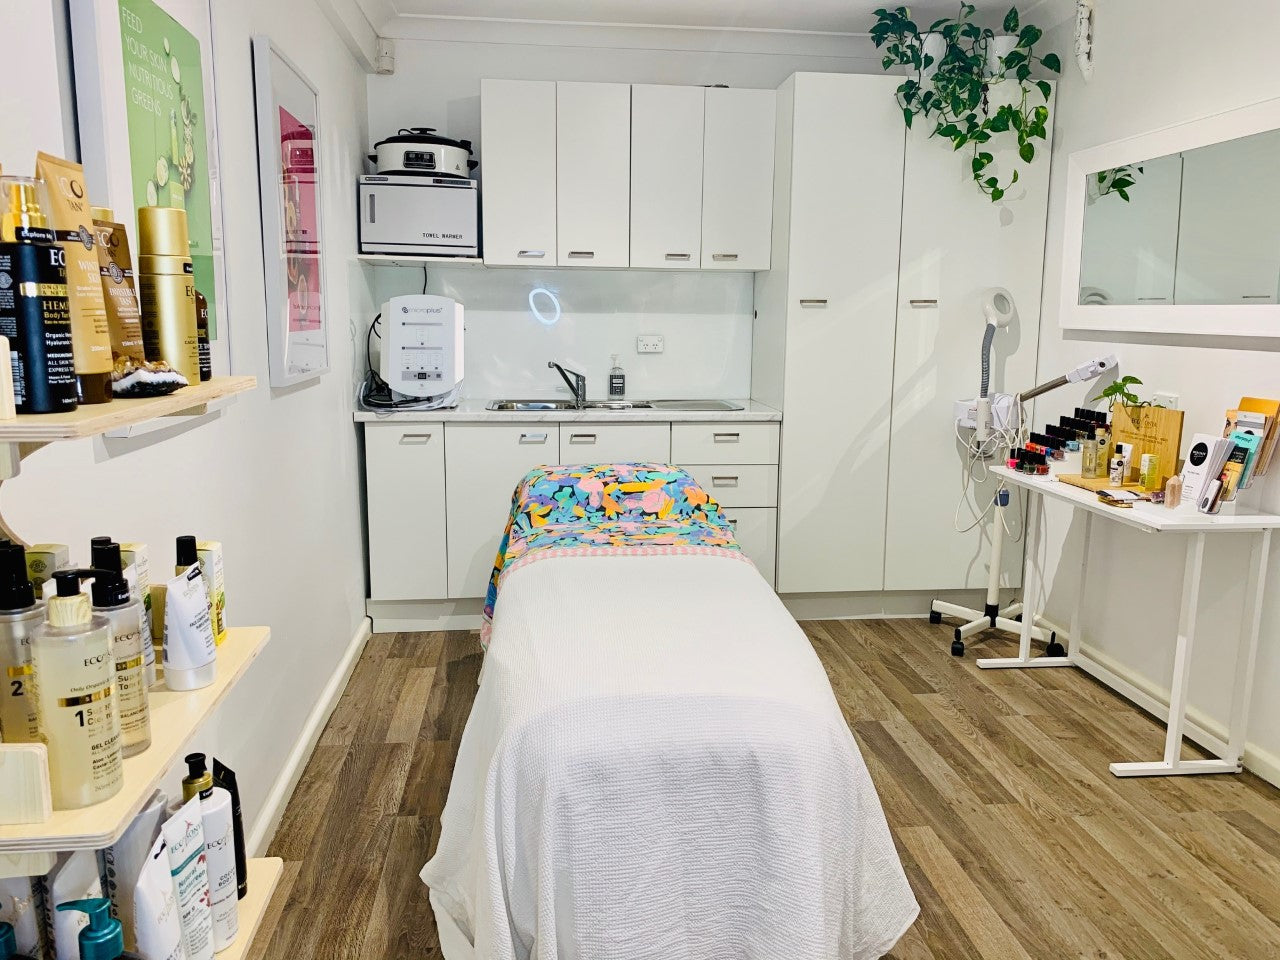 Meditate and Exfoliate is a unique Beauty Therapy salon situation in Niagara Park on the New South Wales Central Coast. At Meditate and Exfoliate we offer a wide range of skin, body and beauty treatments. We are committed to creating a safe nurturing spac